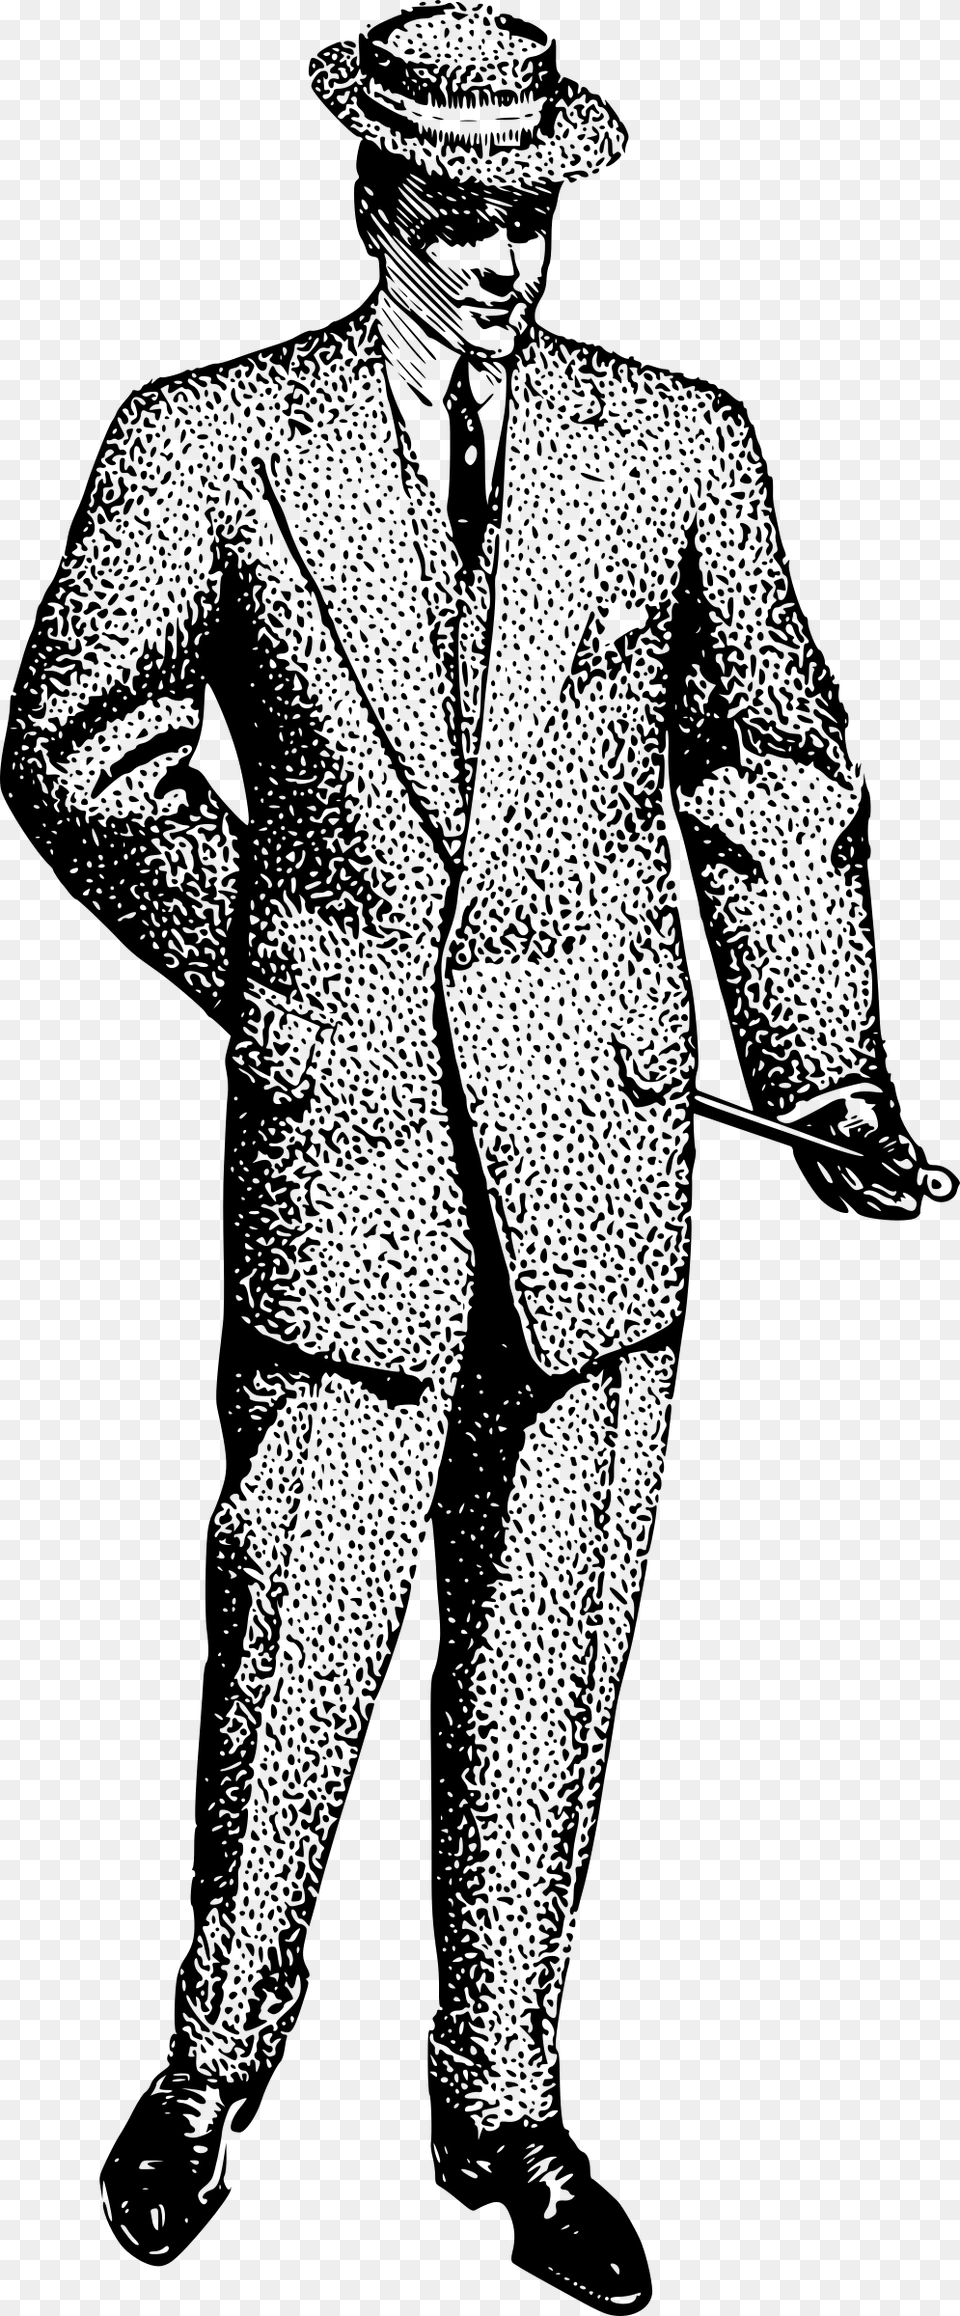 This Icons Design Of Man In A Cool Suit, Gray Free Transparent Png